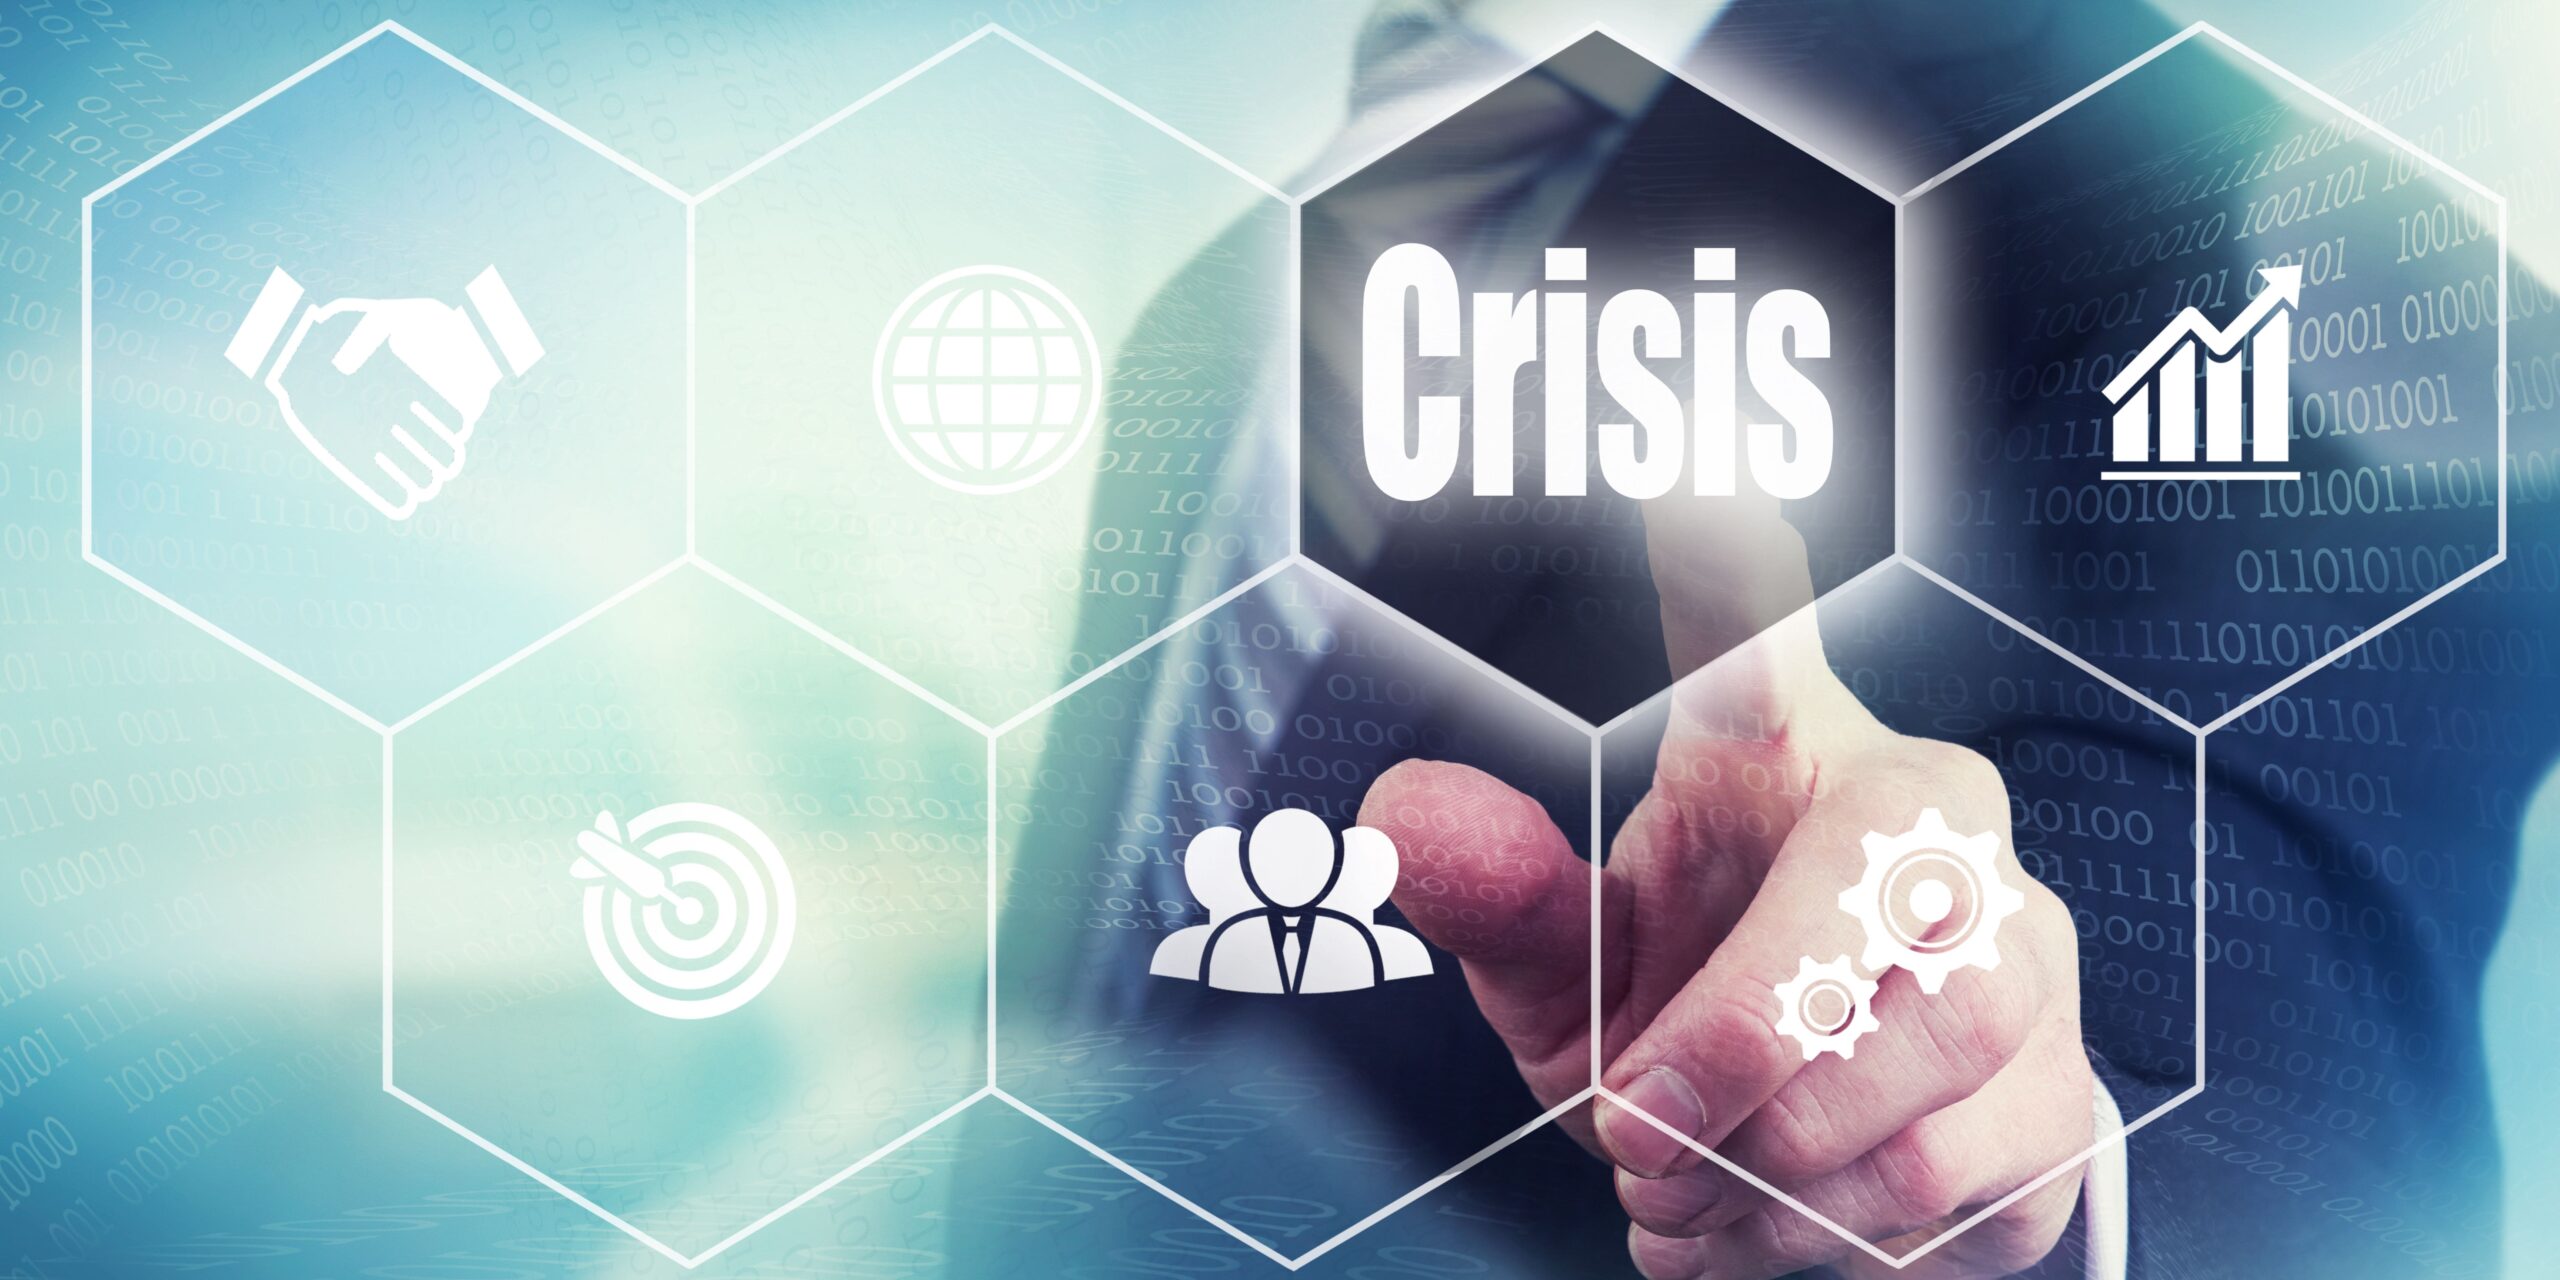 How do you tackle the crisis as a manager with your team?